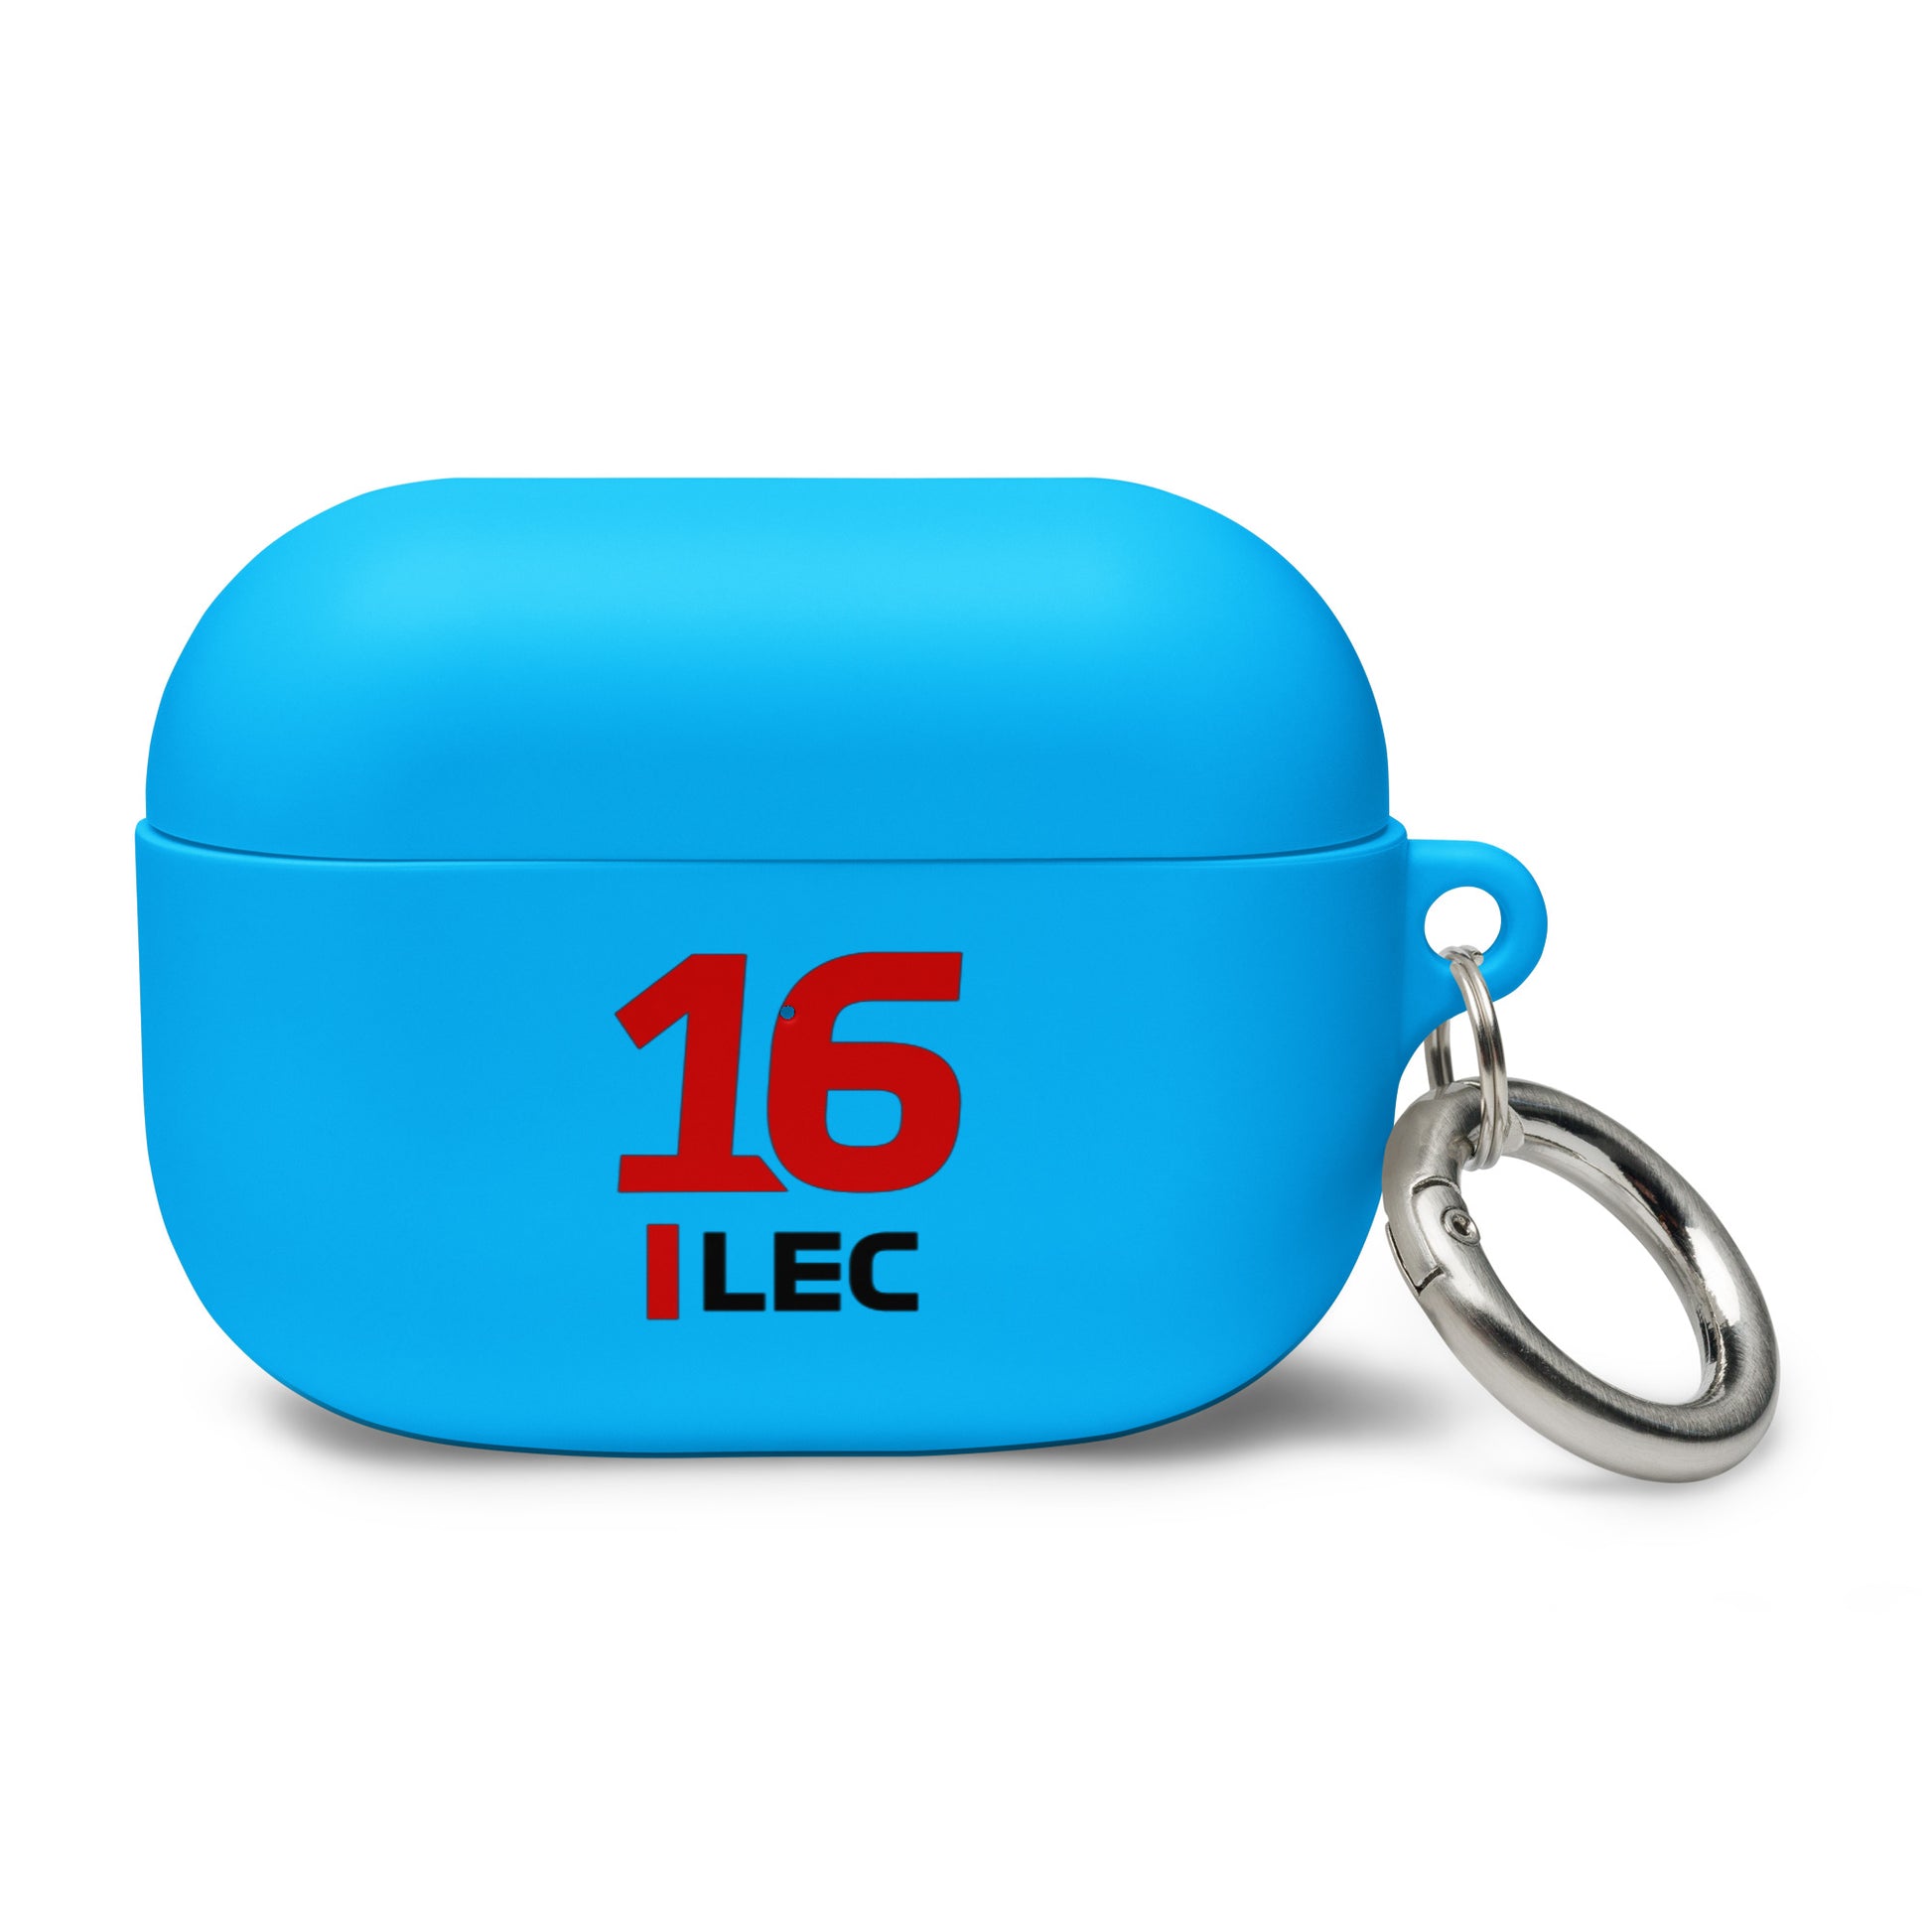 Charles Leclerc AirPods Case pro blue